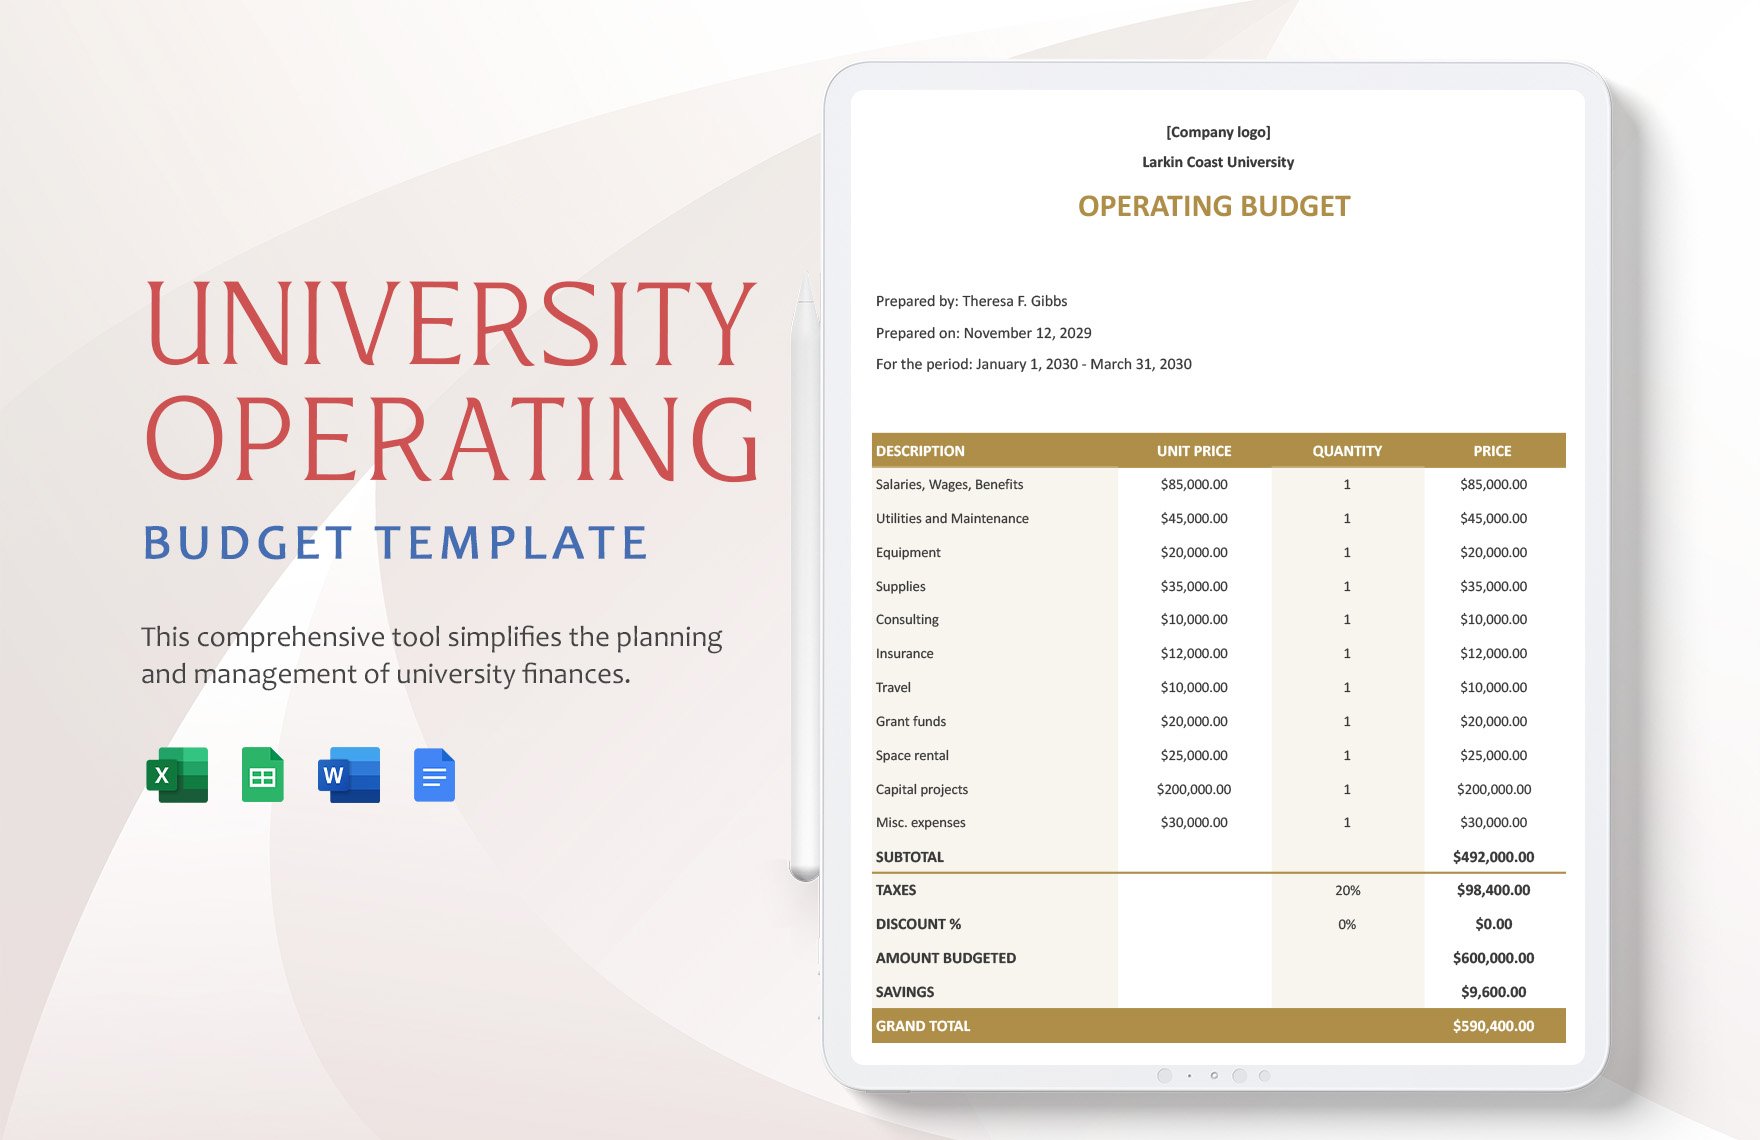 University Operating Budget Template in Word, Google Docs, Excel, Google Sheets